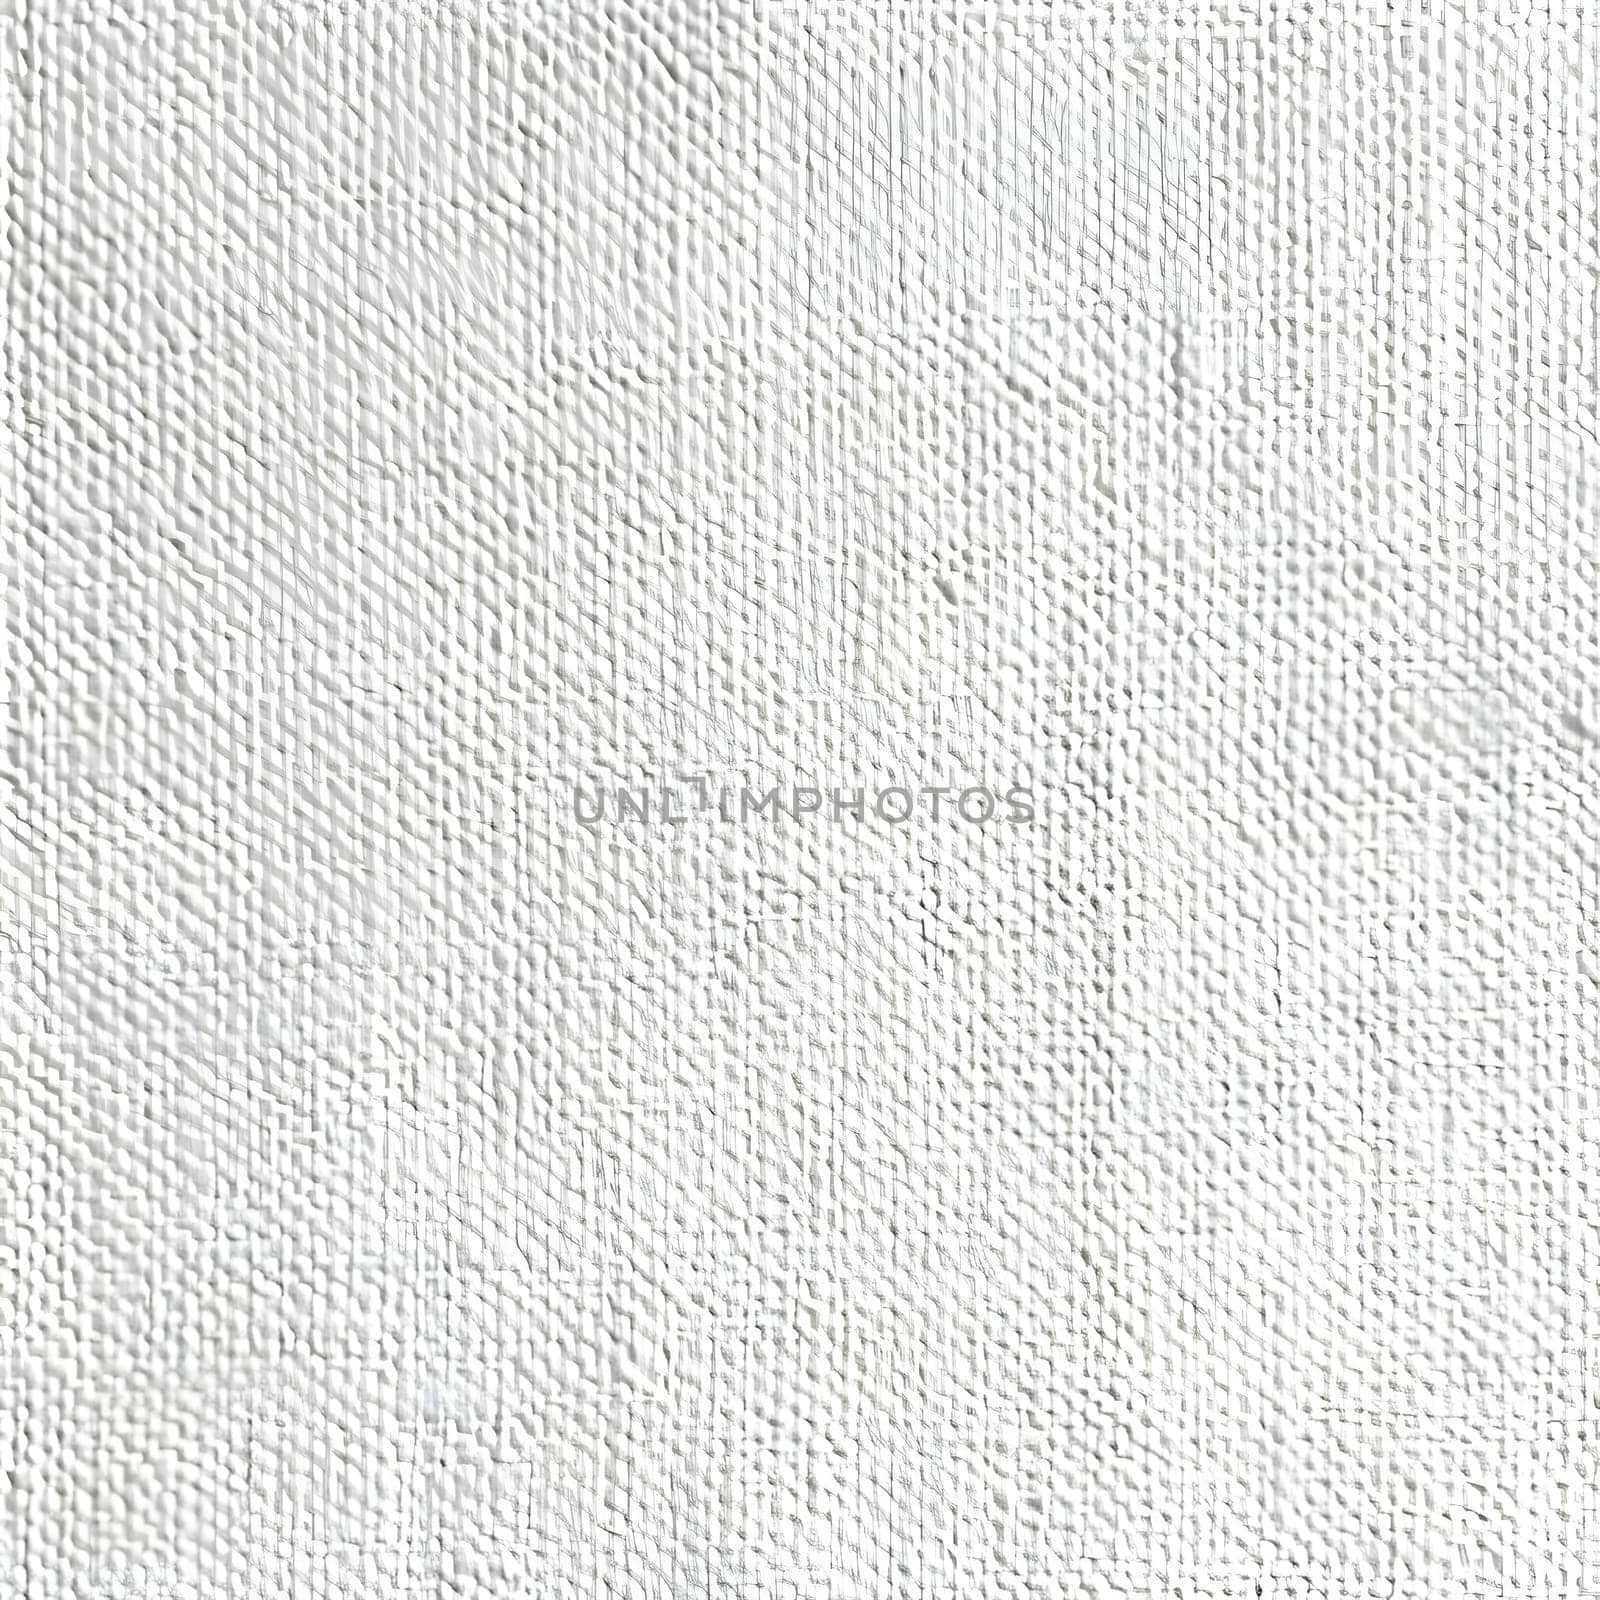 A close up of a white textile fabric texture with a subtle grey rectangular pattern resembling wood or concrete flooring, set against a beige background